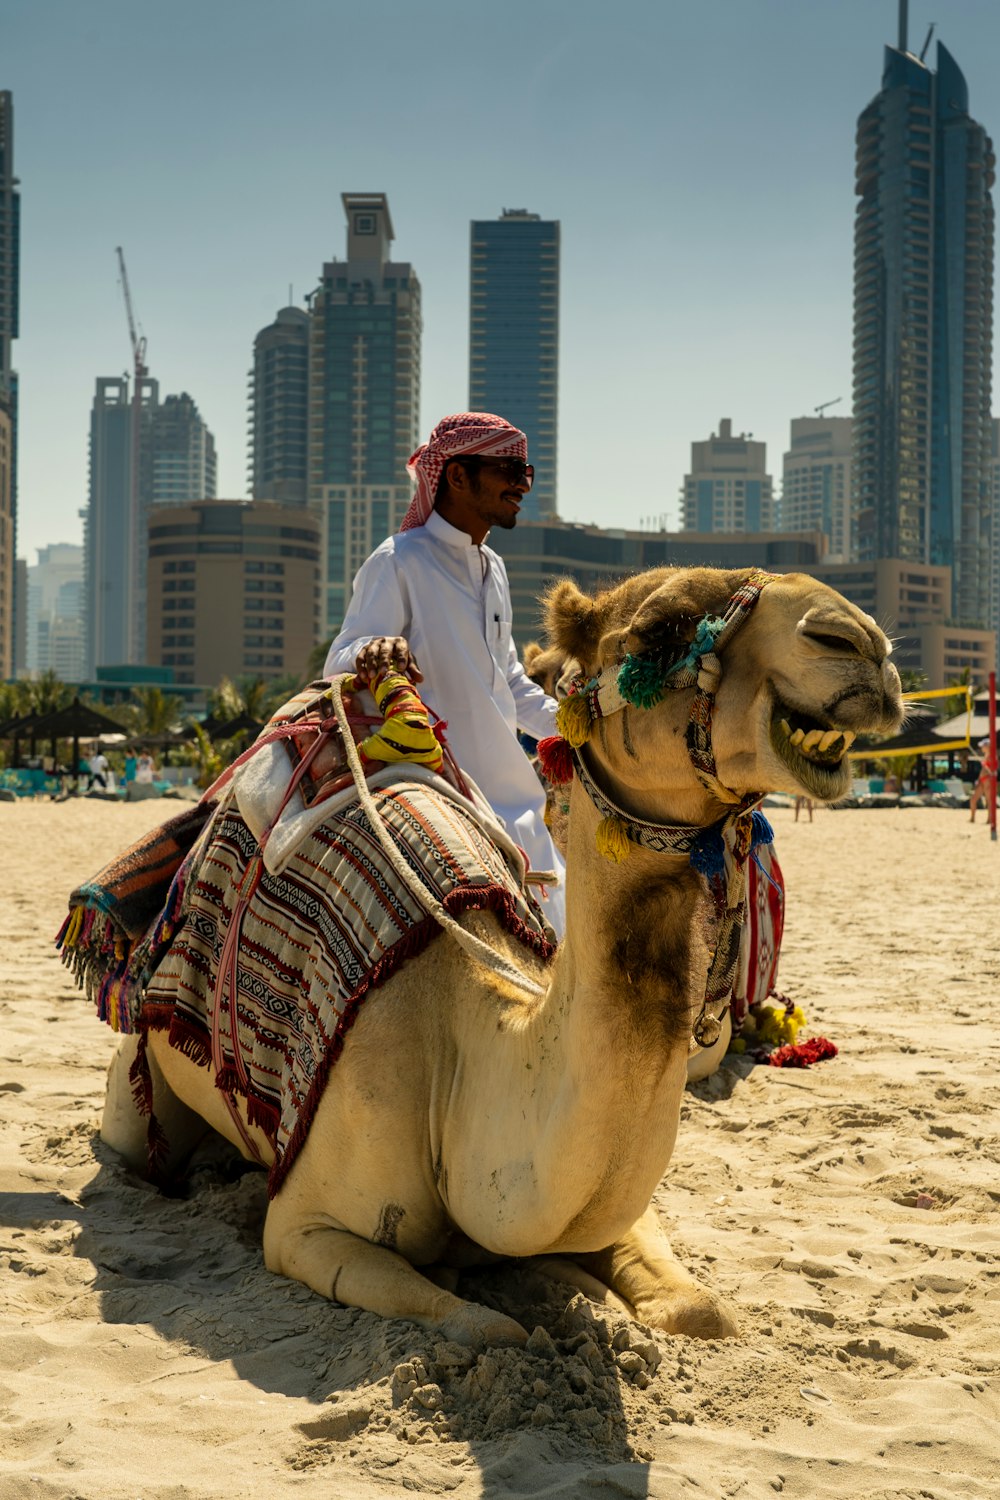 woman in red and white hijab riding camel on brown sand during daytime